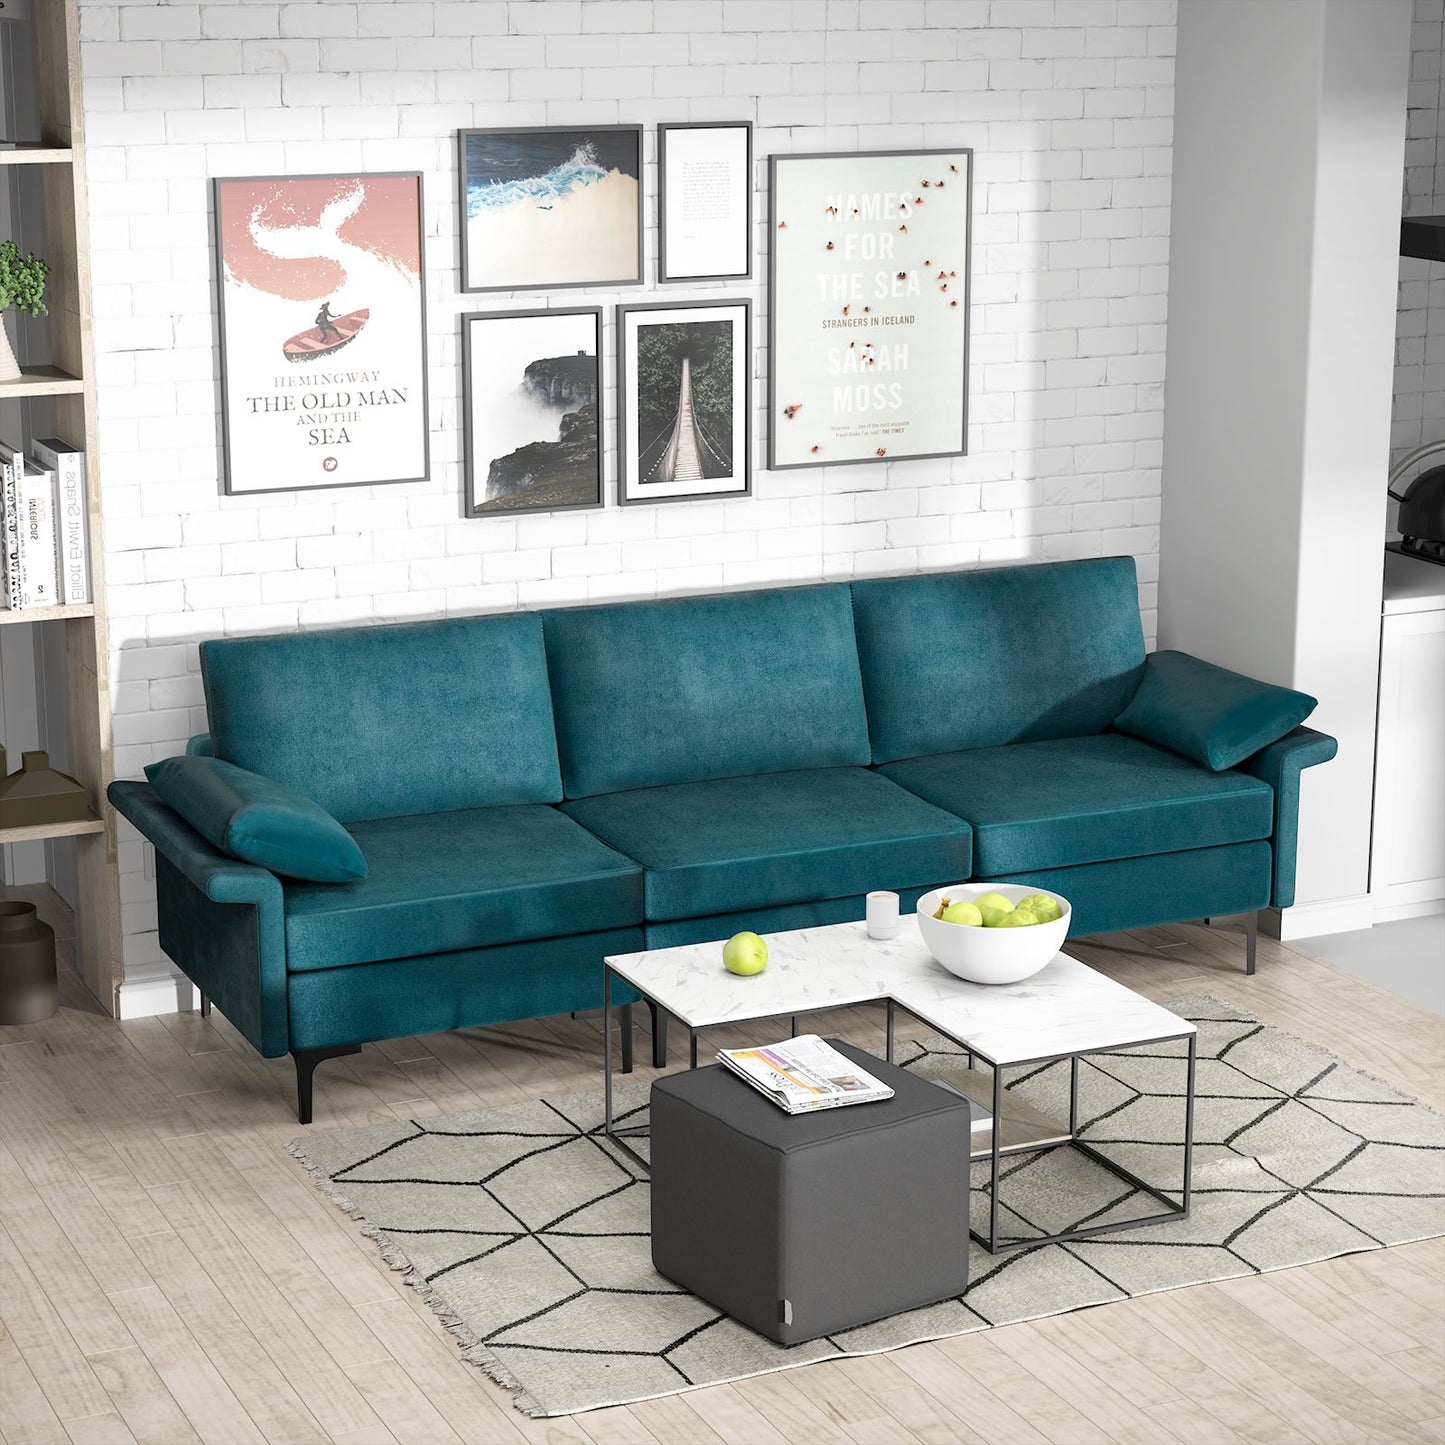 Large 3-Seat Sofa Sectional with Metal Legs and 2 USB Ports for 3-4 people, Turquoise